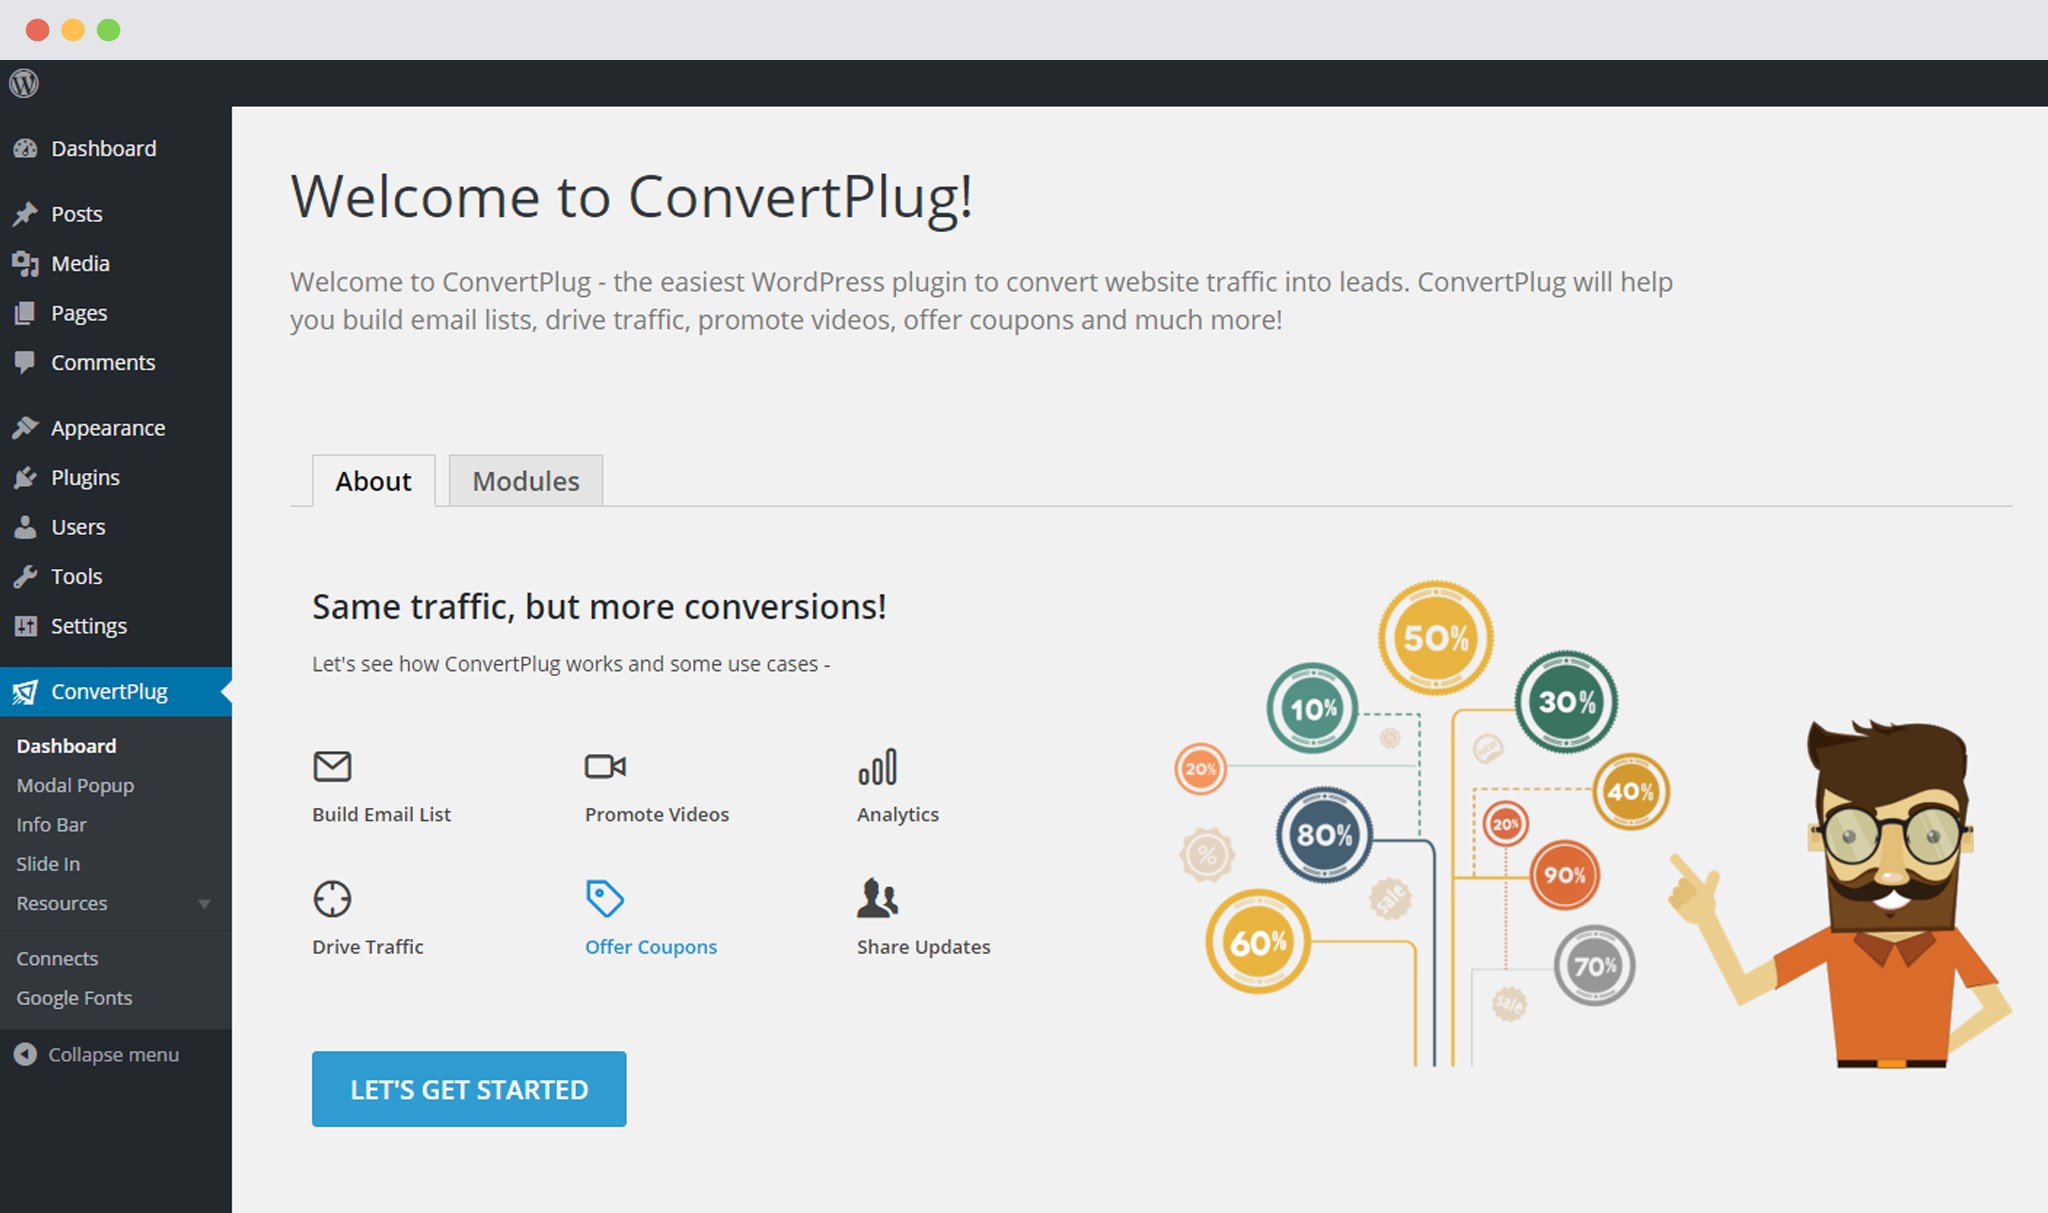 modal-popup-page in ConvertPlug